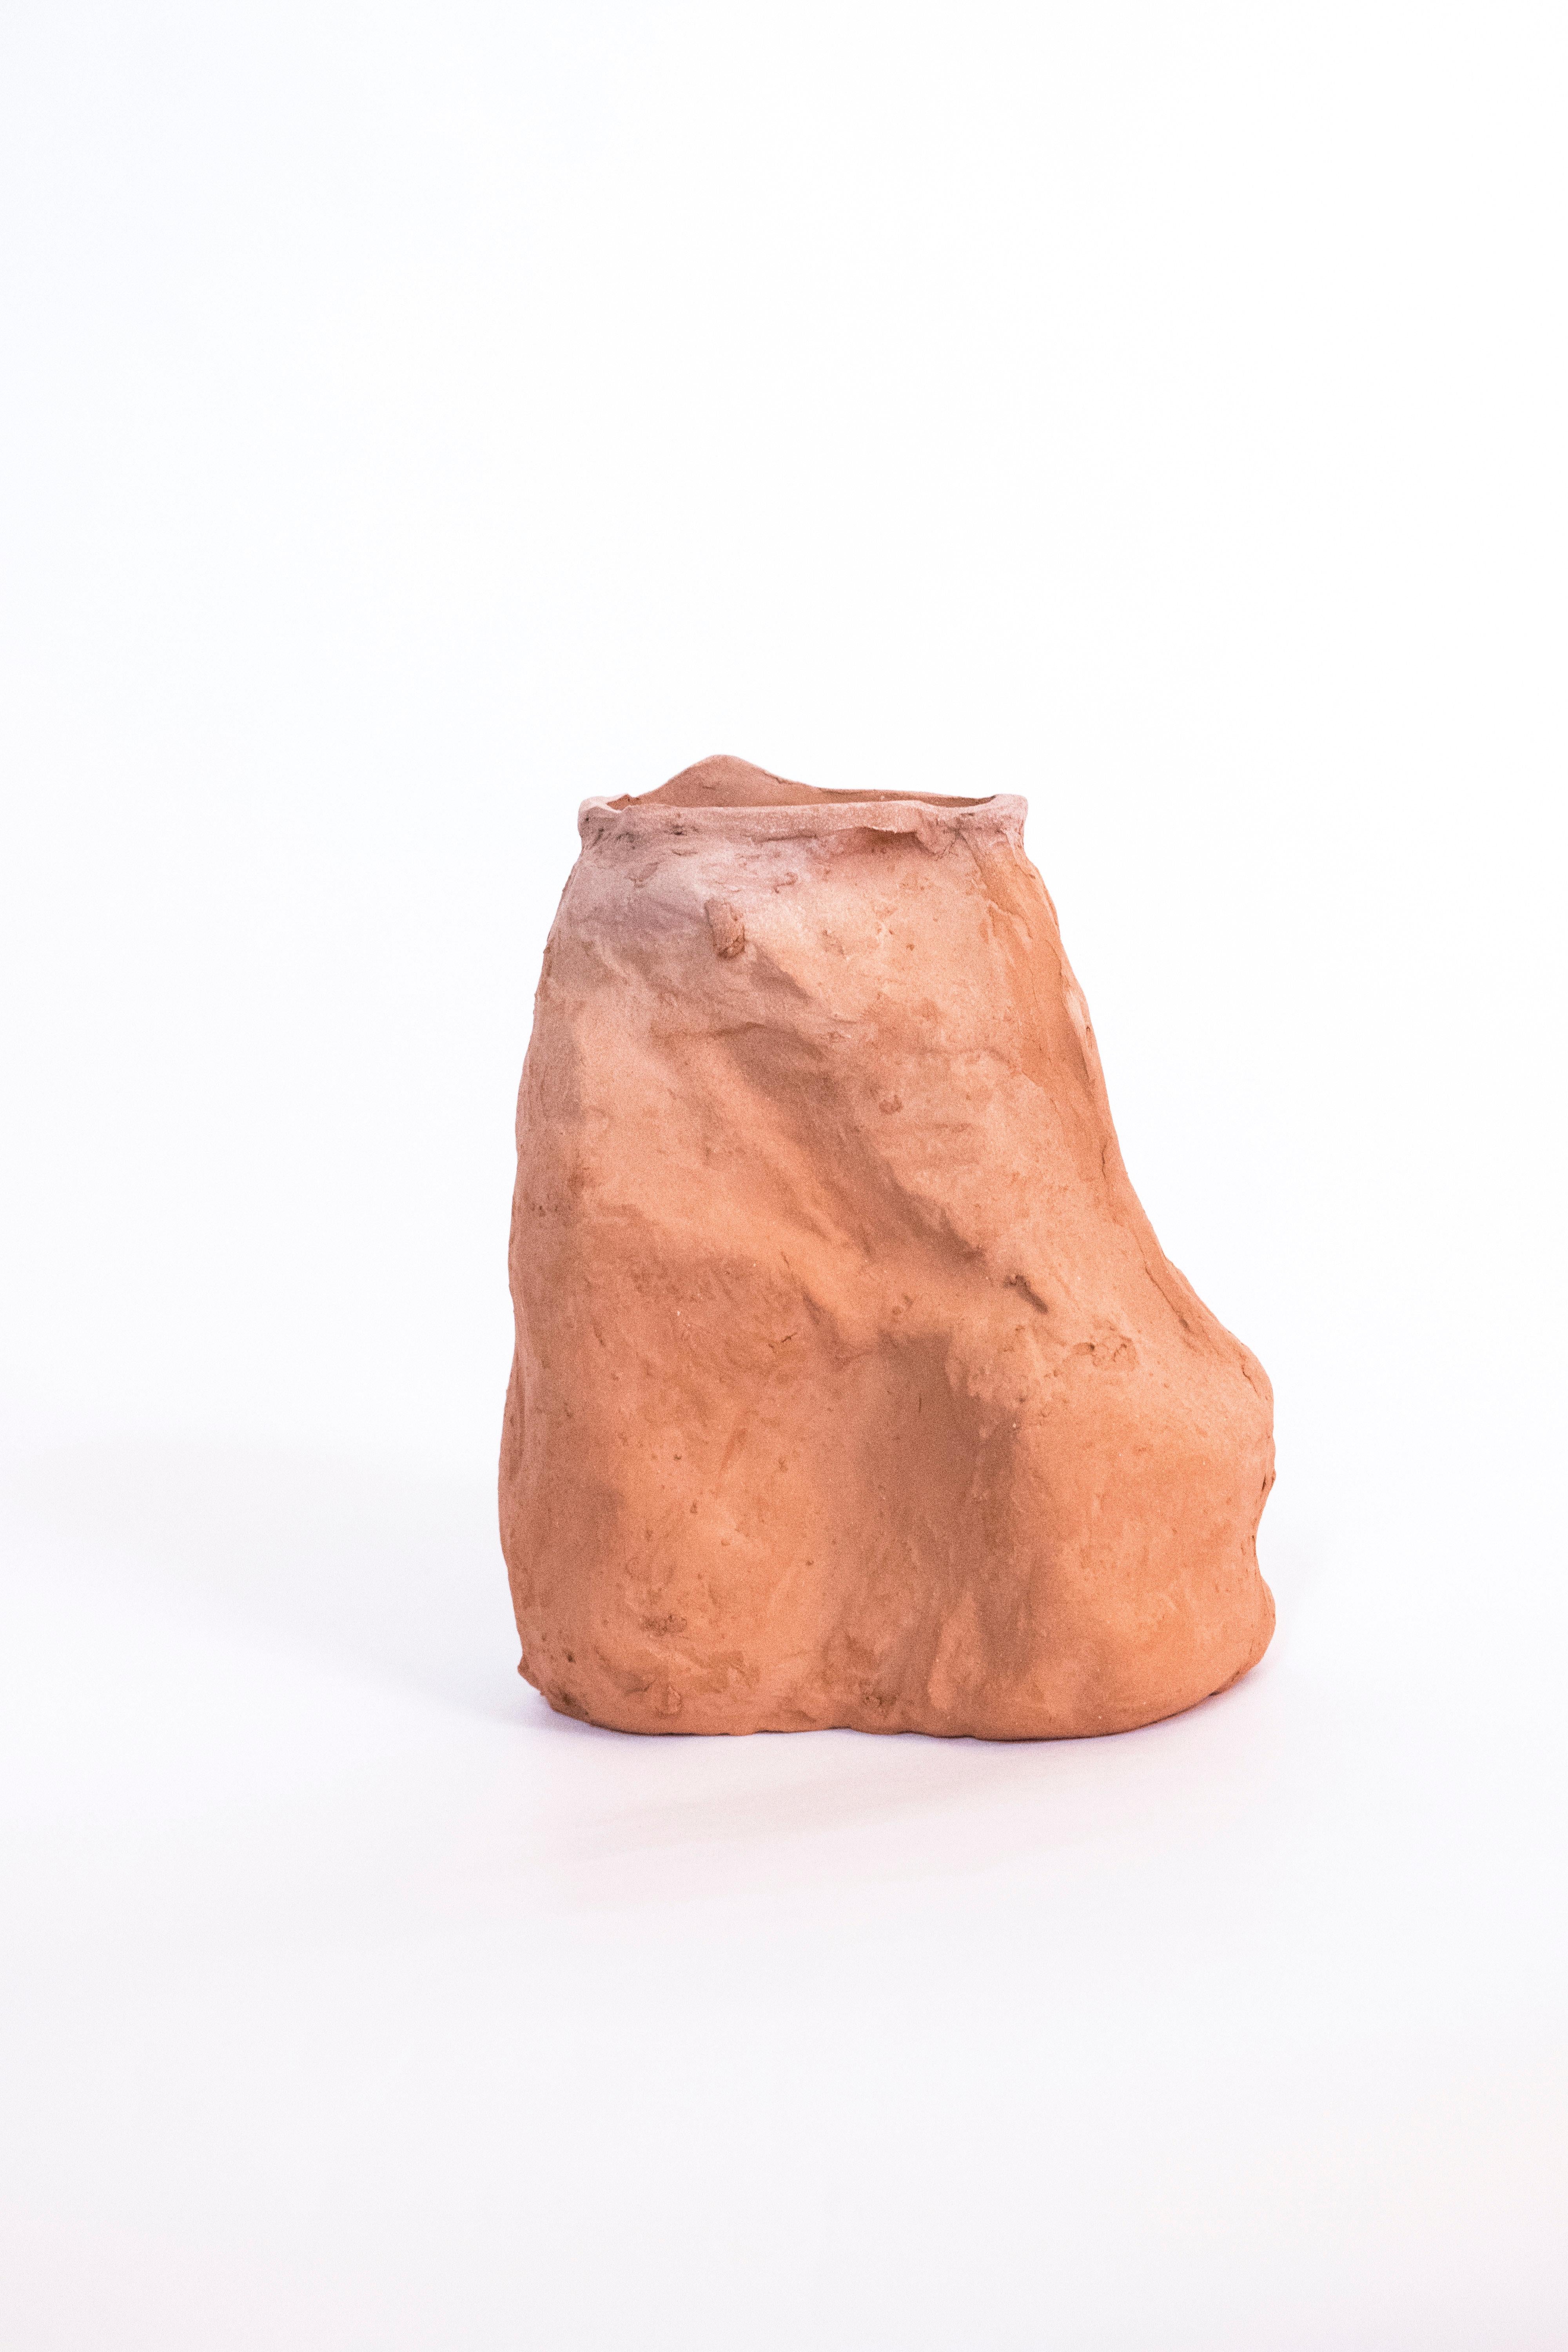 Gaïamorphism, unique organic vase, Aurore
Measures: 14 x 11 x 7 cm

Established in Gironde estuary, Gaïamorphism process embodies the local topography through raw available material by using ancestral ceramic techniques. Gaïamorphism draws here